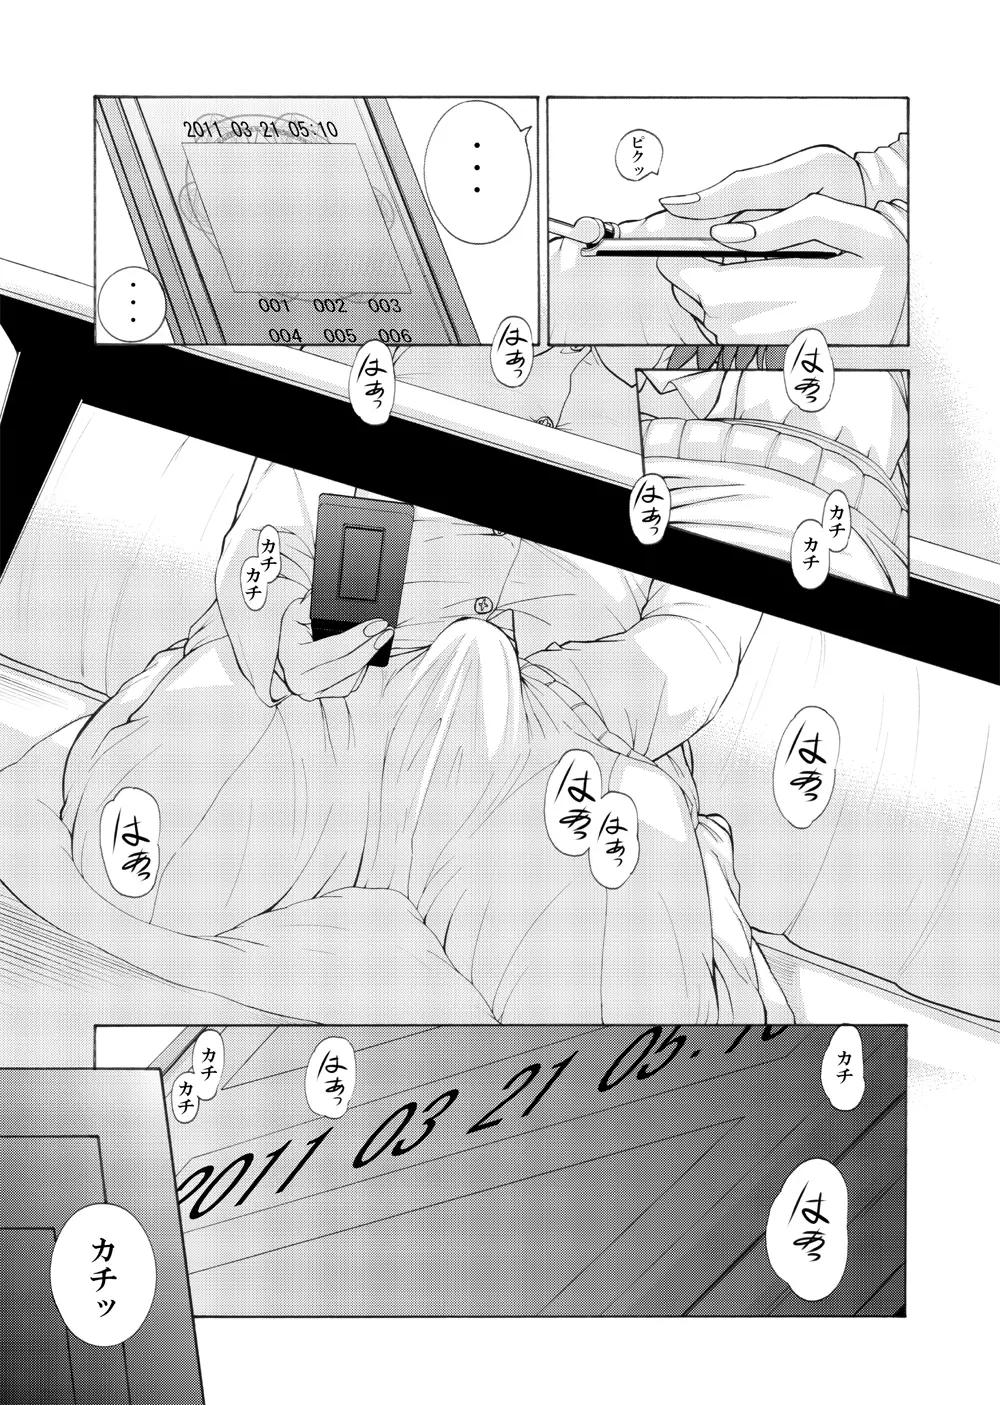 [remora works] FUTACOLO CO -WITCH CRAFT- feat.カラス VOL.003 - page5